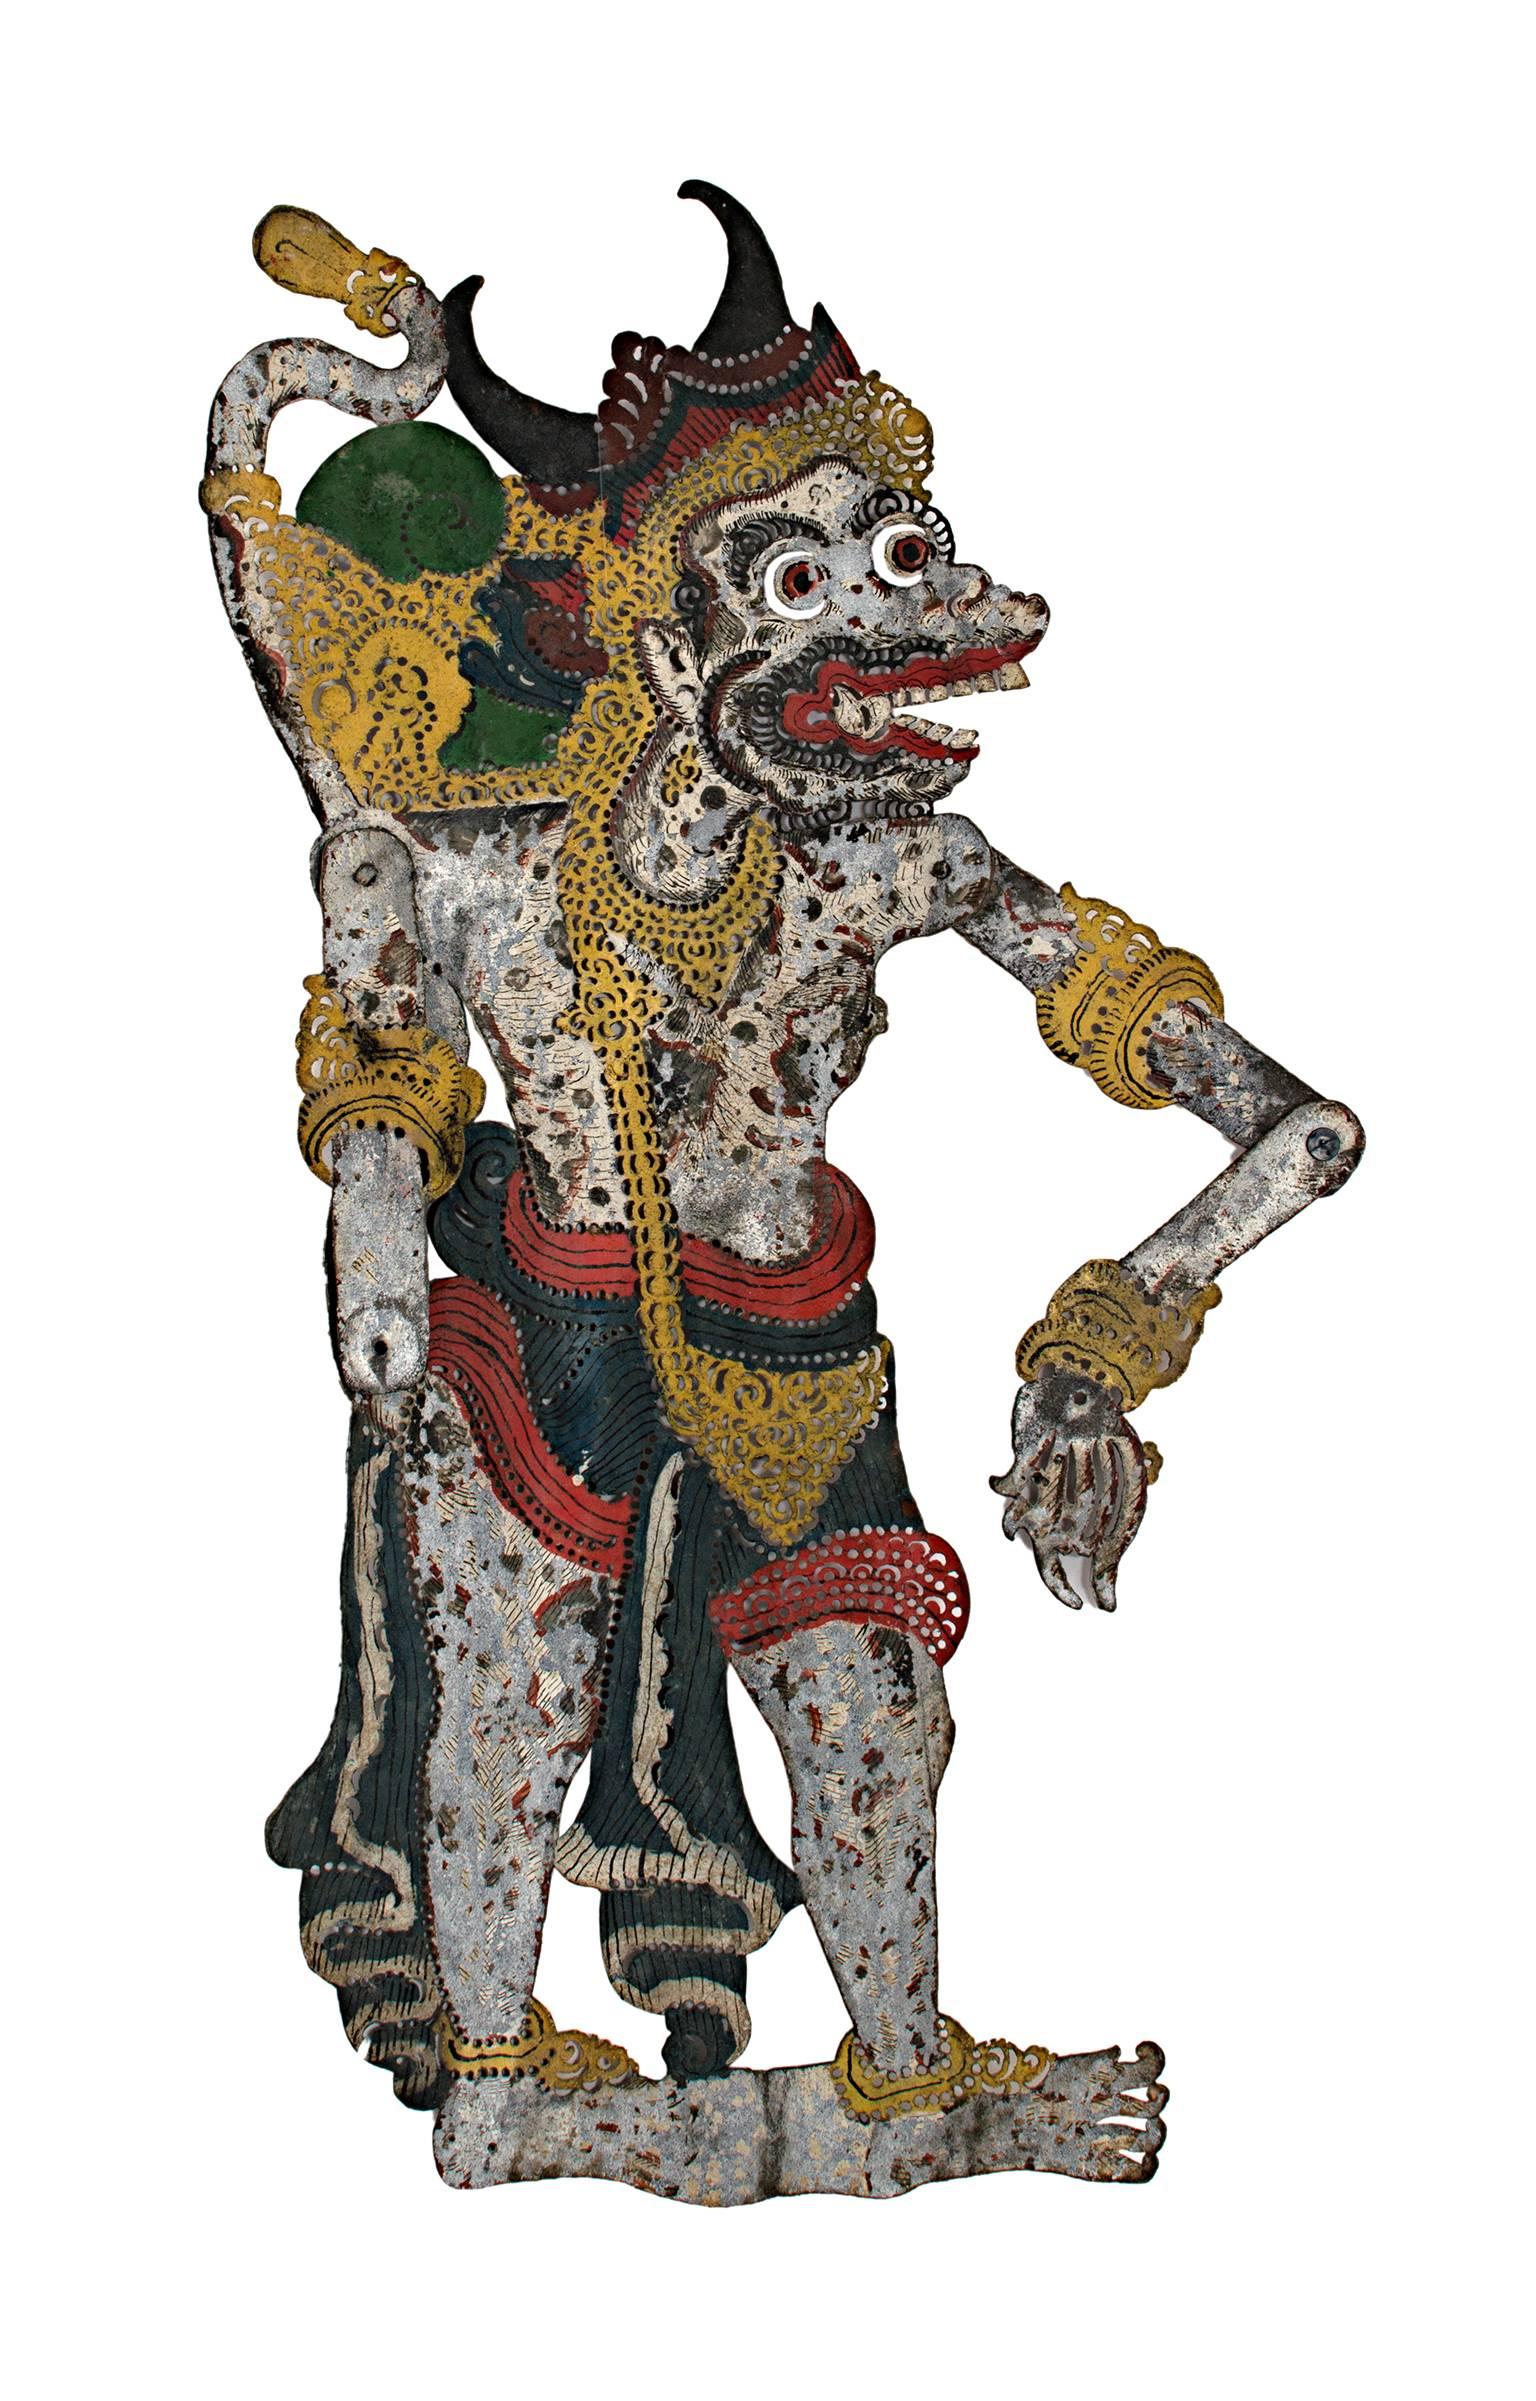 Unknown Figurative Sculpture - "Shadow Puppet Wayang Purwa, " Leather created in Indonesia in the 19th century